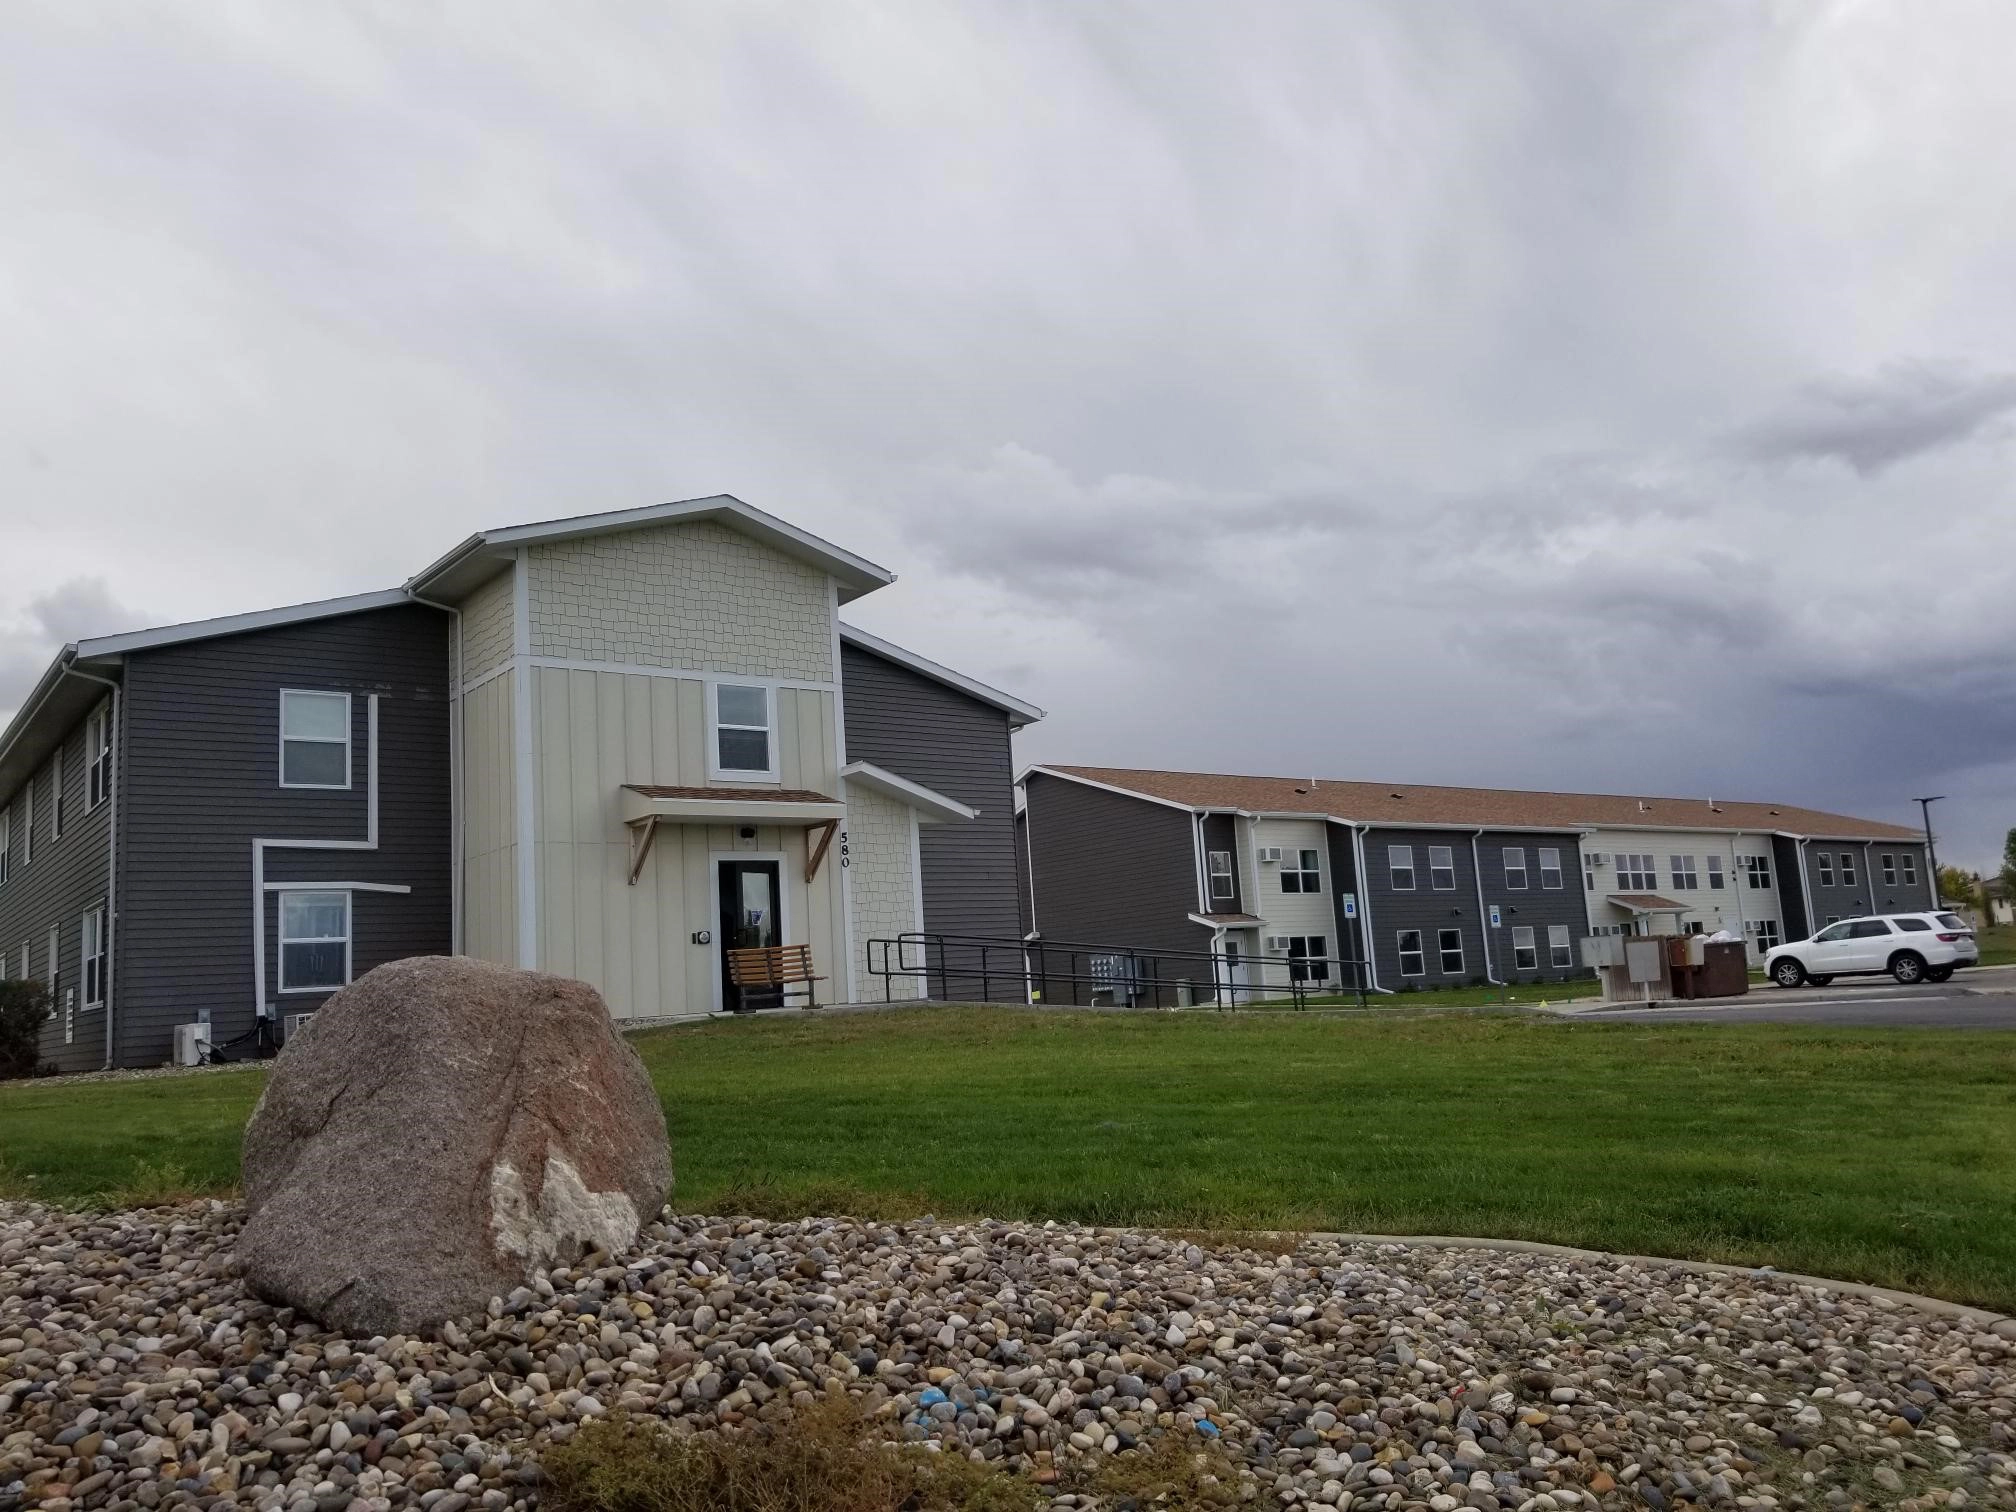 This is a 24-unit rehabilitation project, located at 560 & 580 8th Street SE in Dickinson, ND.  It is dedicated to elderly and disabled households.  As lead developer, CR Builders collaborated with fellow team member Affordable Housing Developers Inc. i